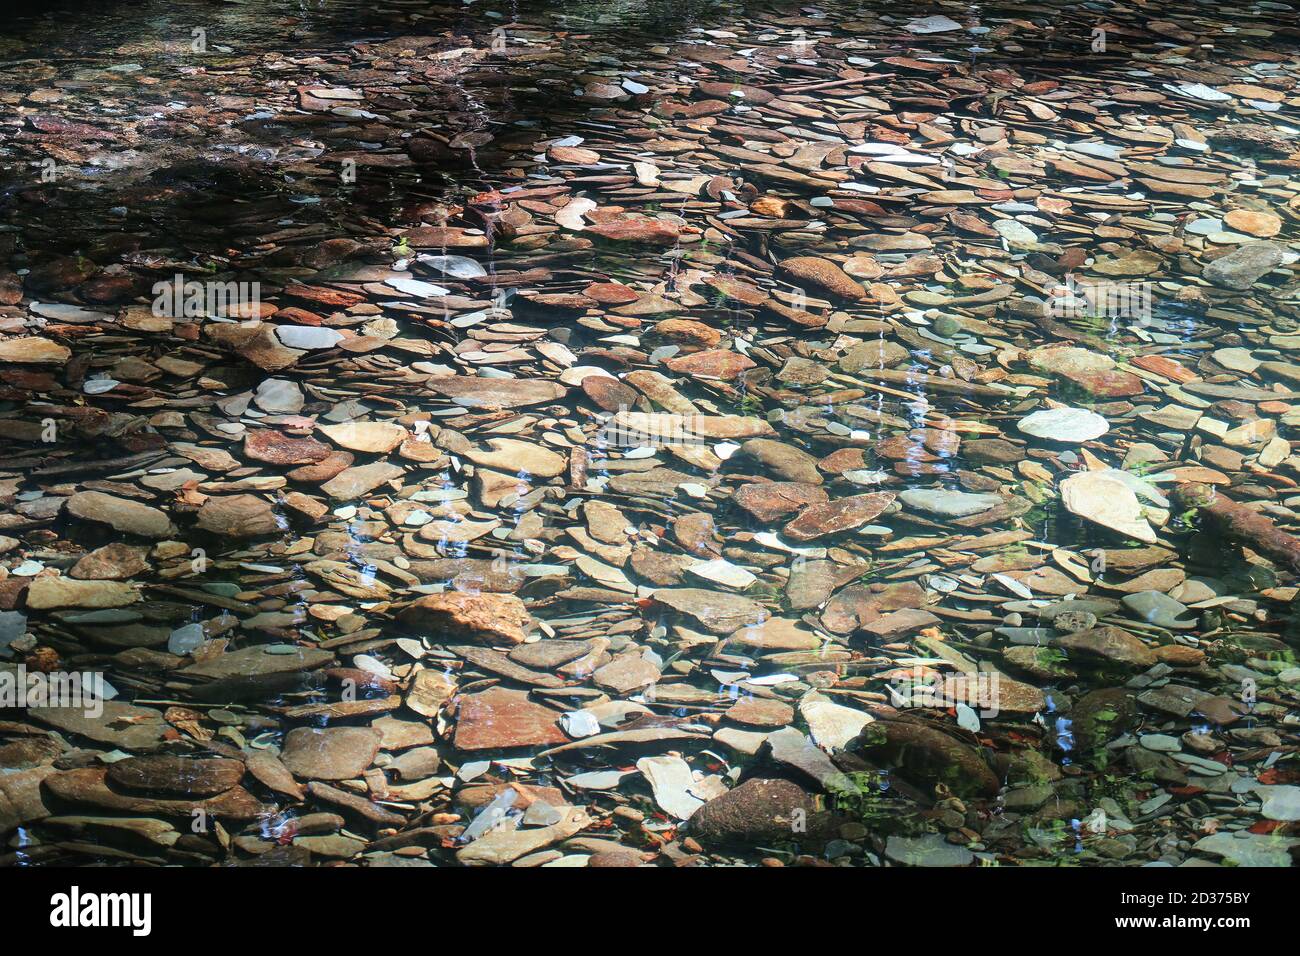 Abstract image of the colorful cobbles at the river bed Stock Photo